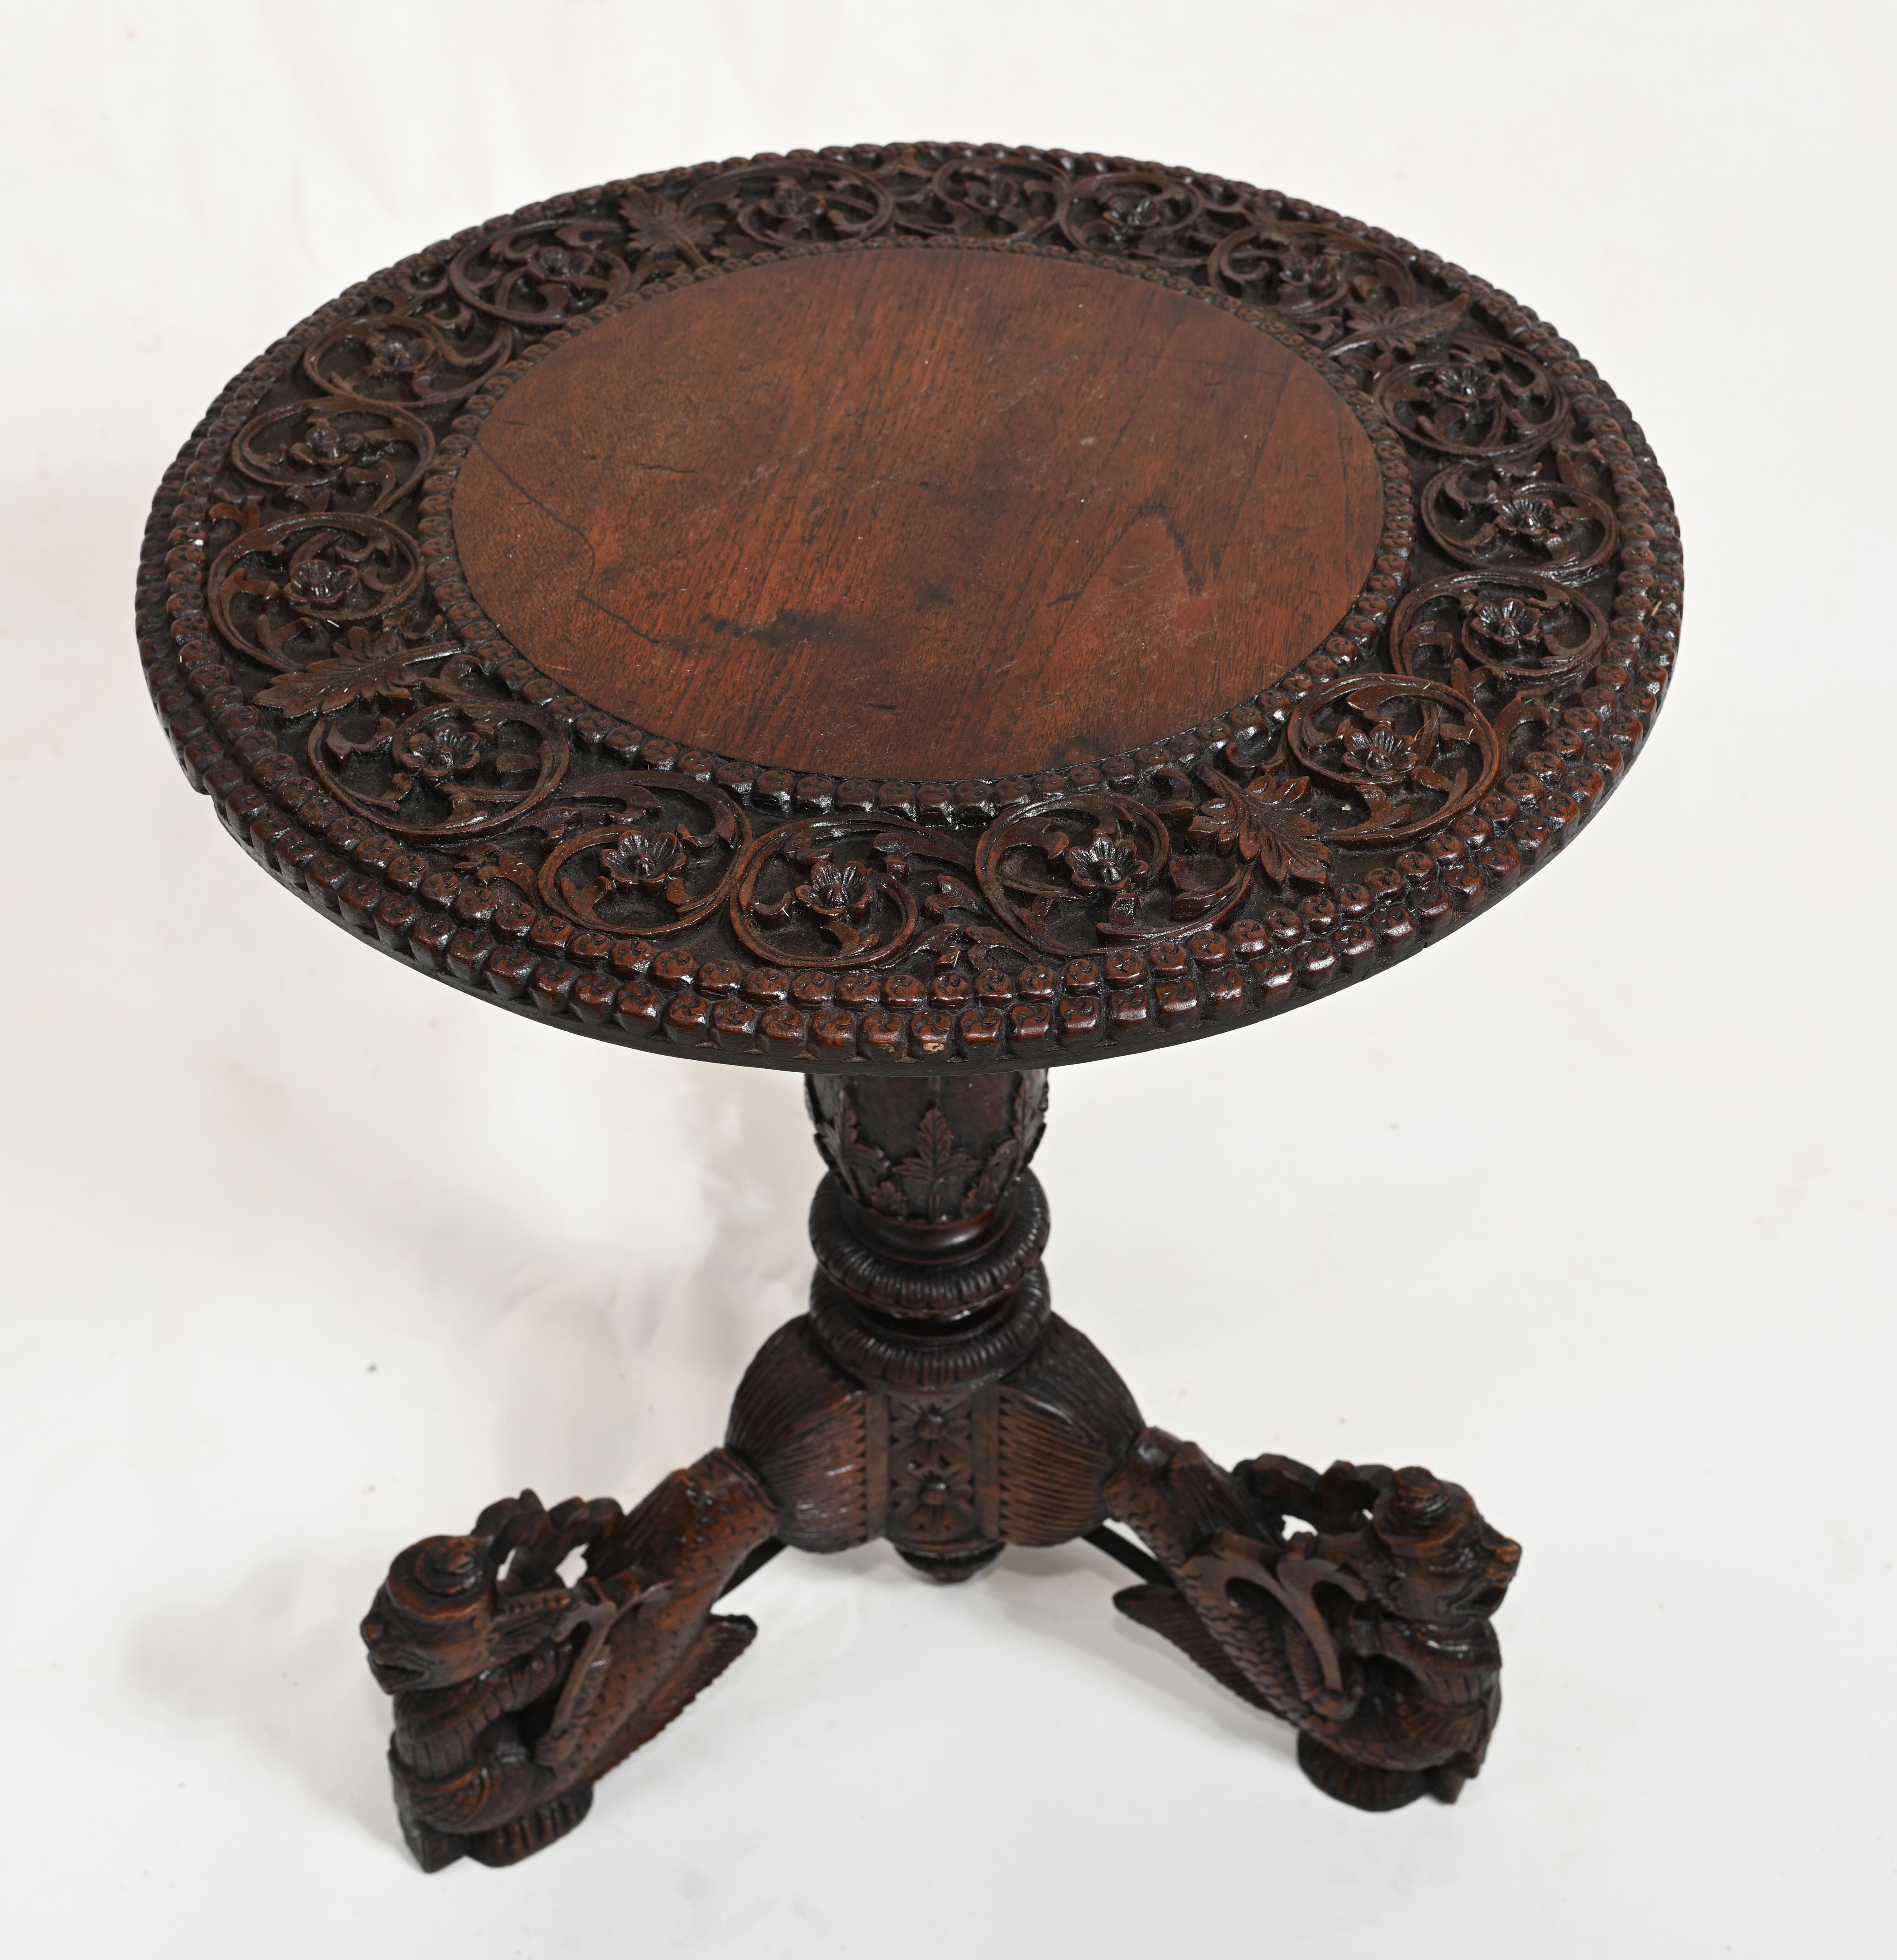 A round highly carved Burmese table on a tri formed base
circa 1840
Legs terminating in mythical Asian characters

Offered in great shape ready for home use right away.